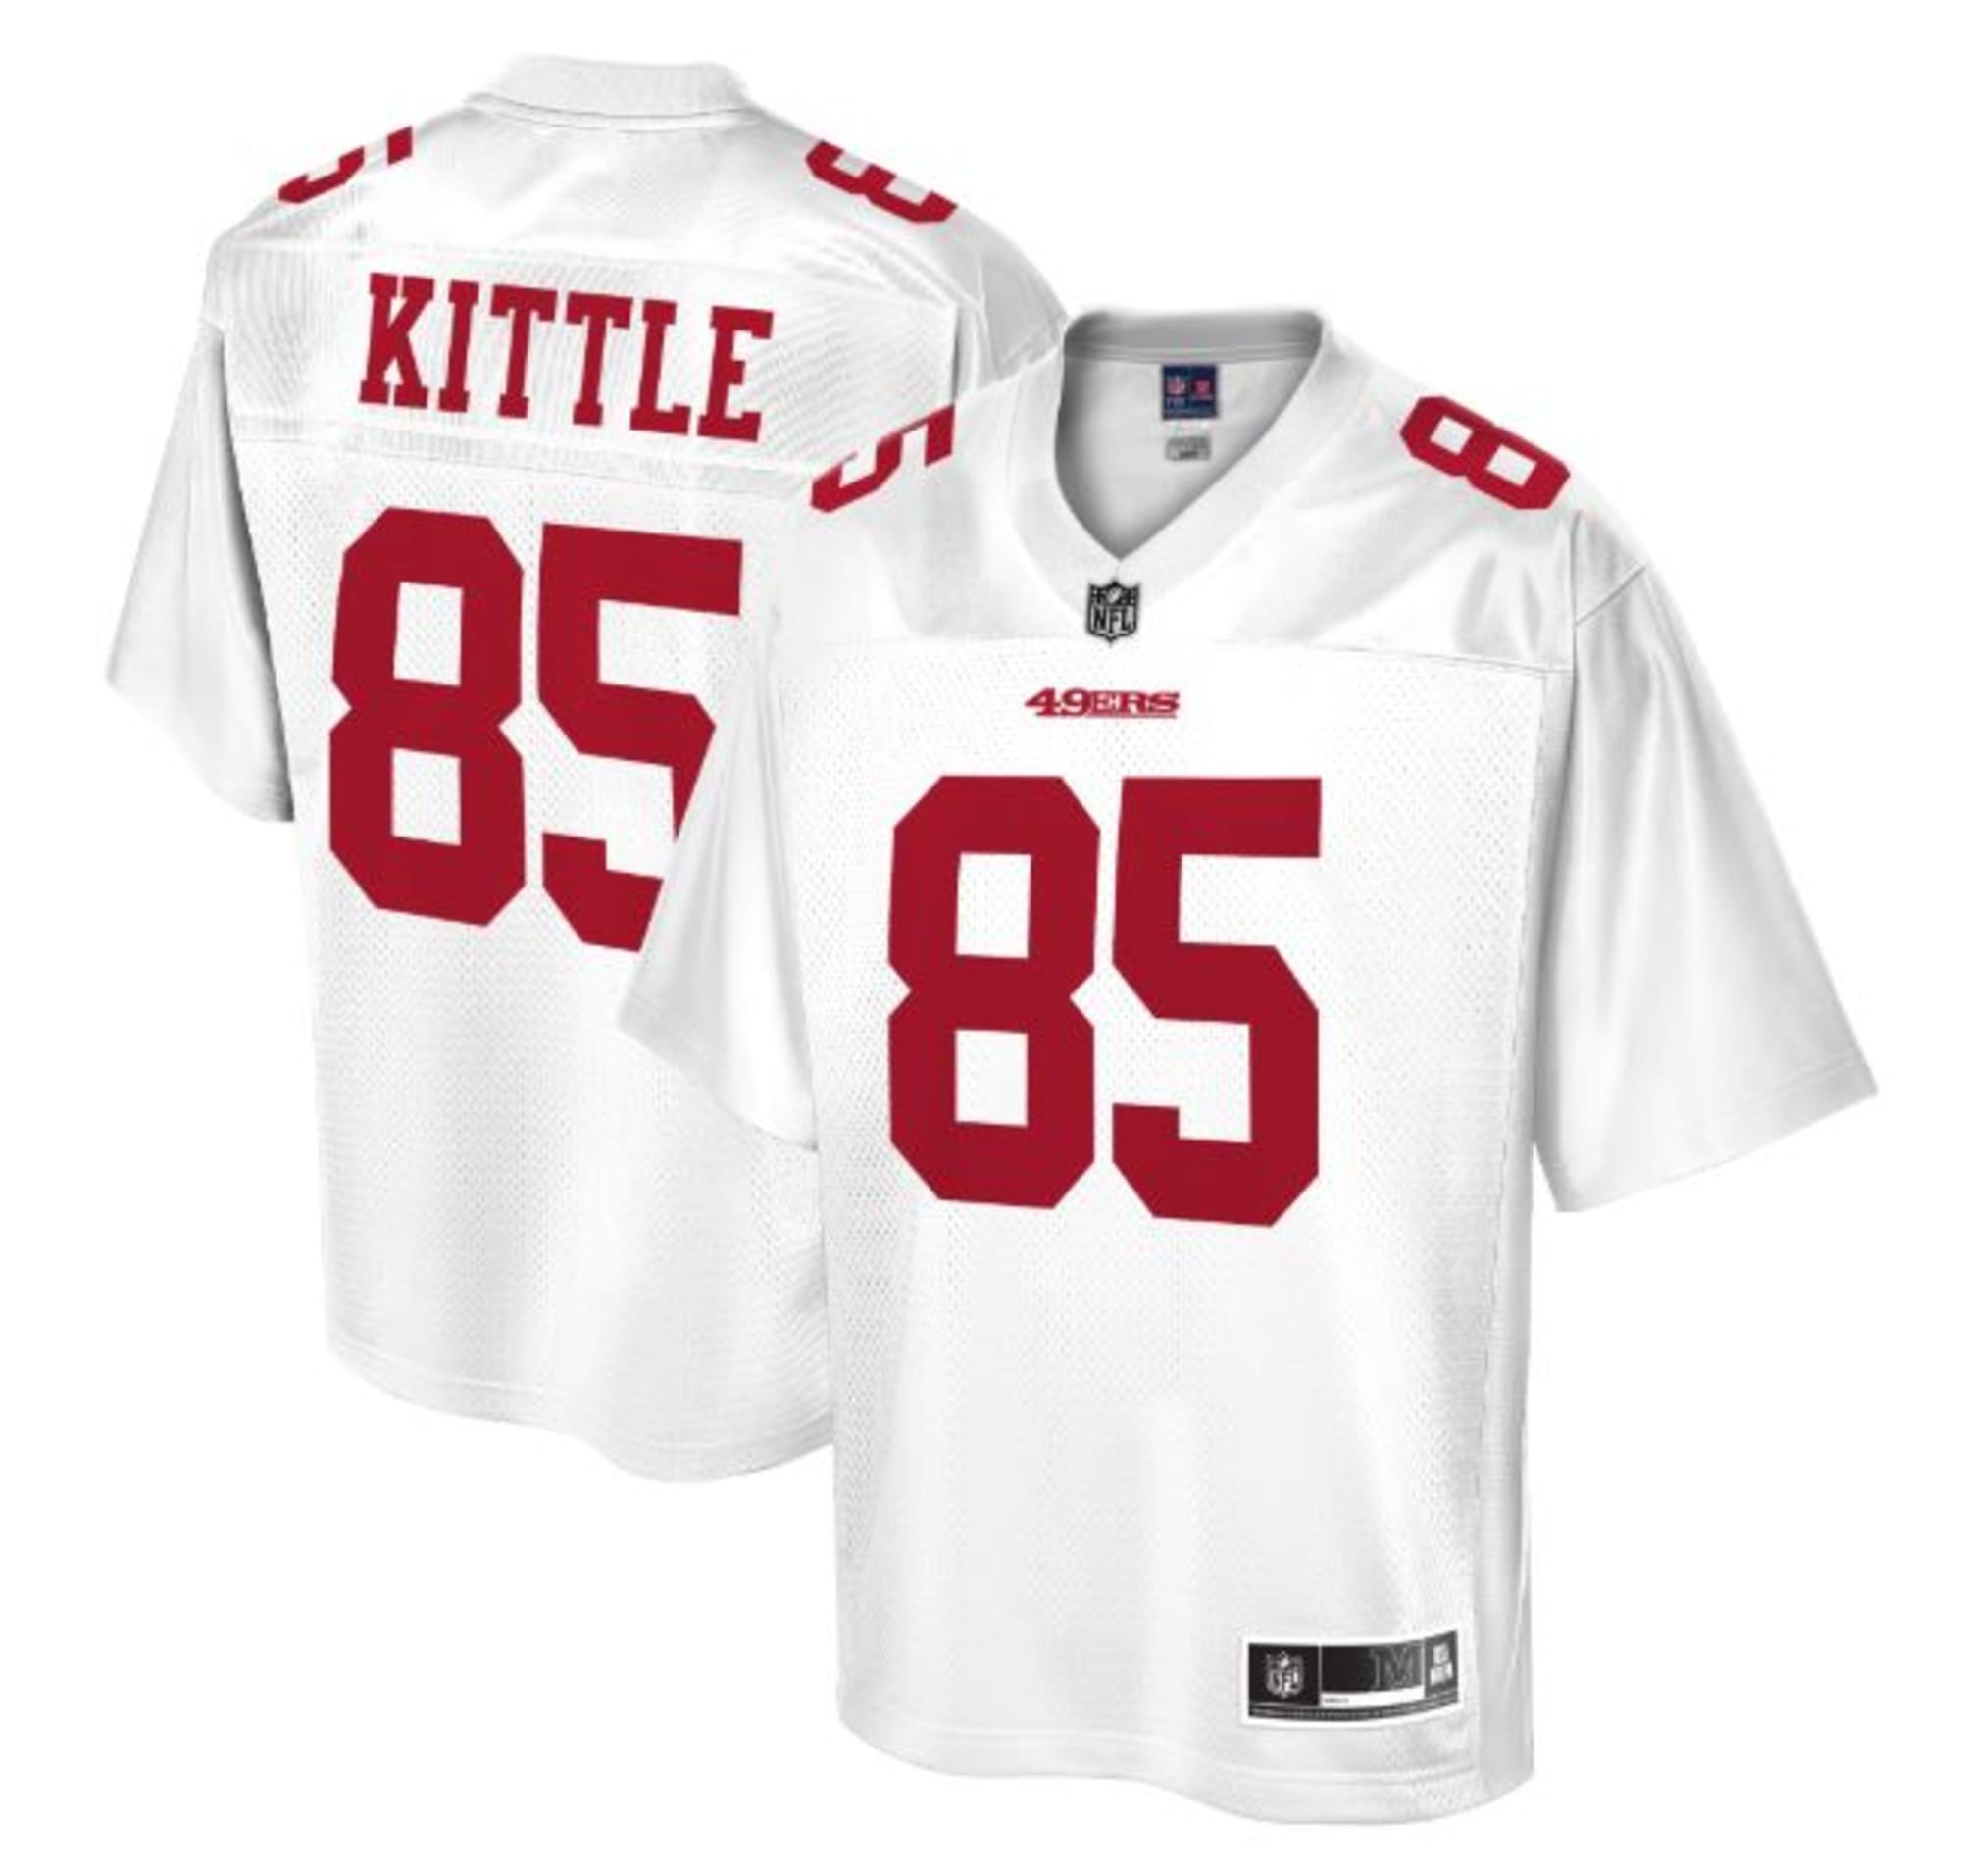 official 49ers jersey